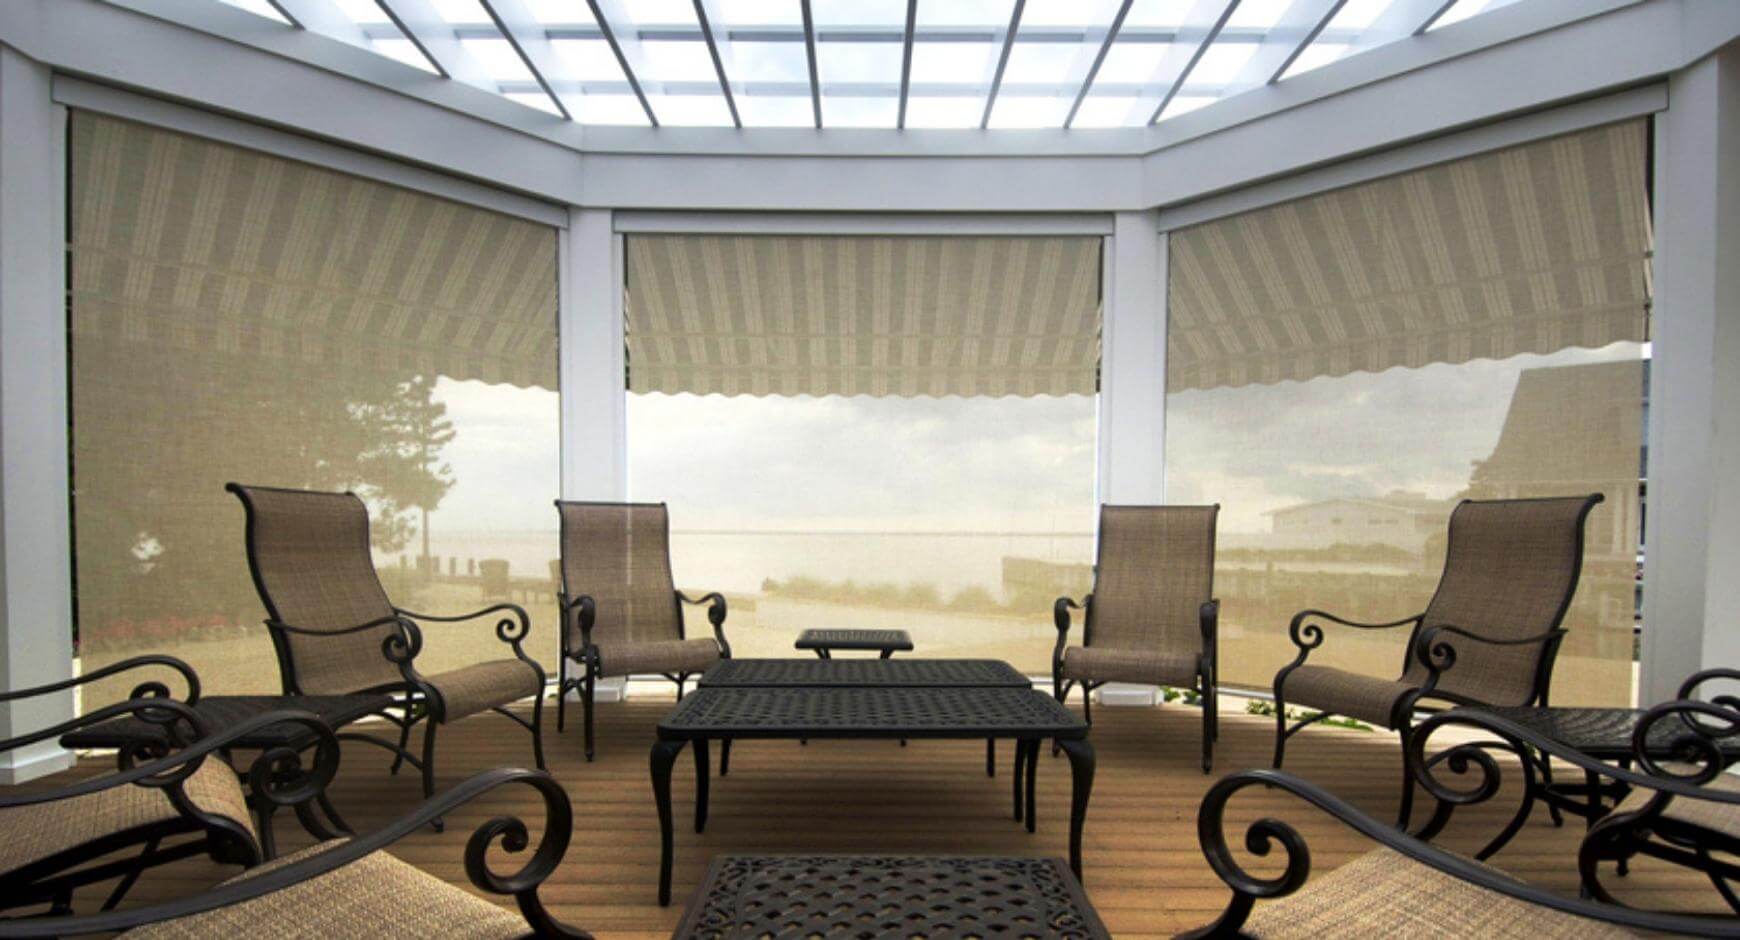 moveable shades and awnings covering sunroom windows